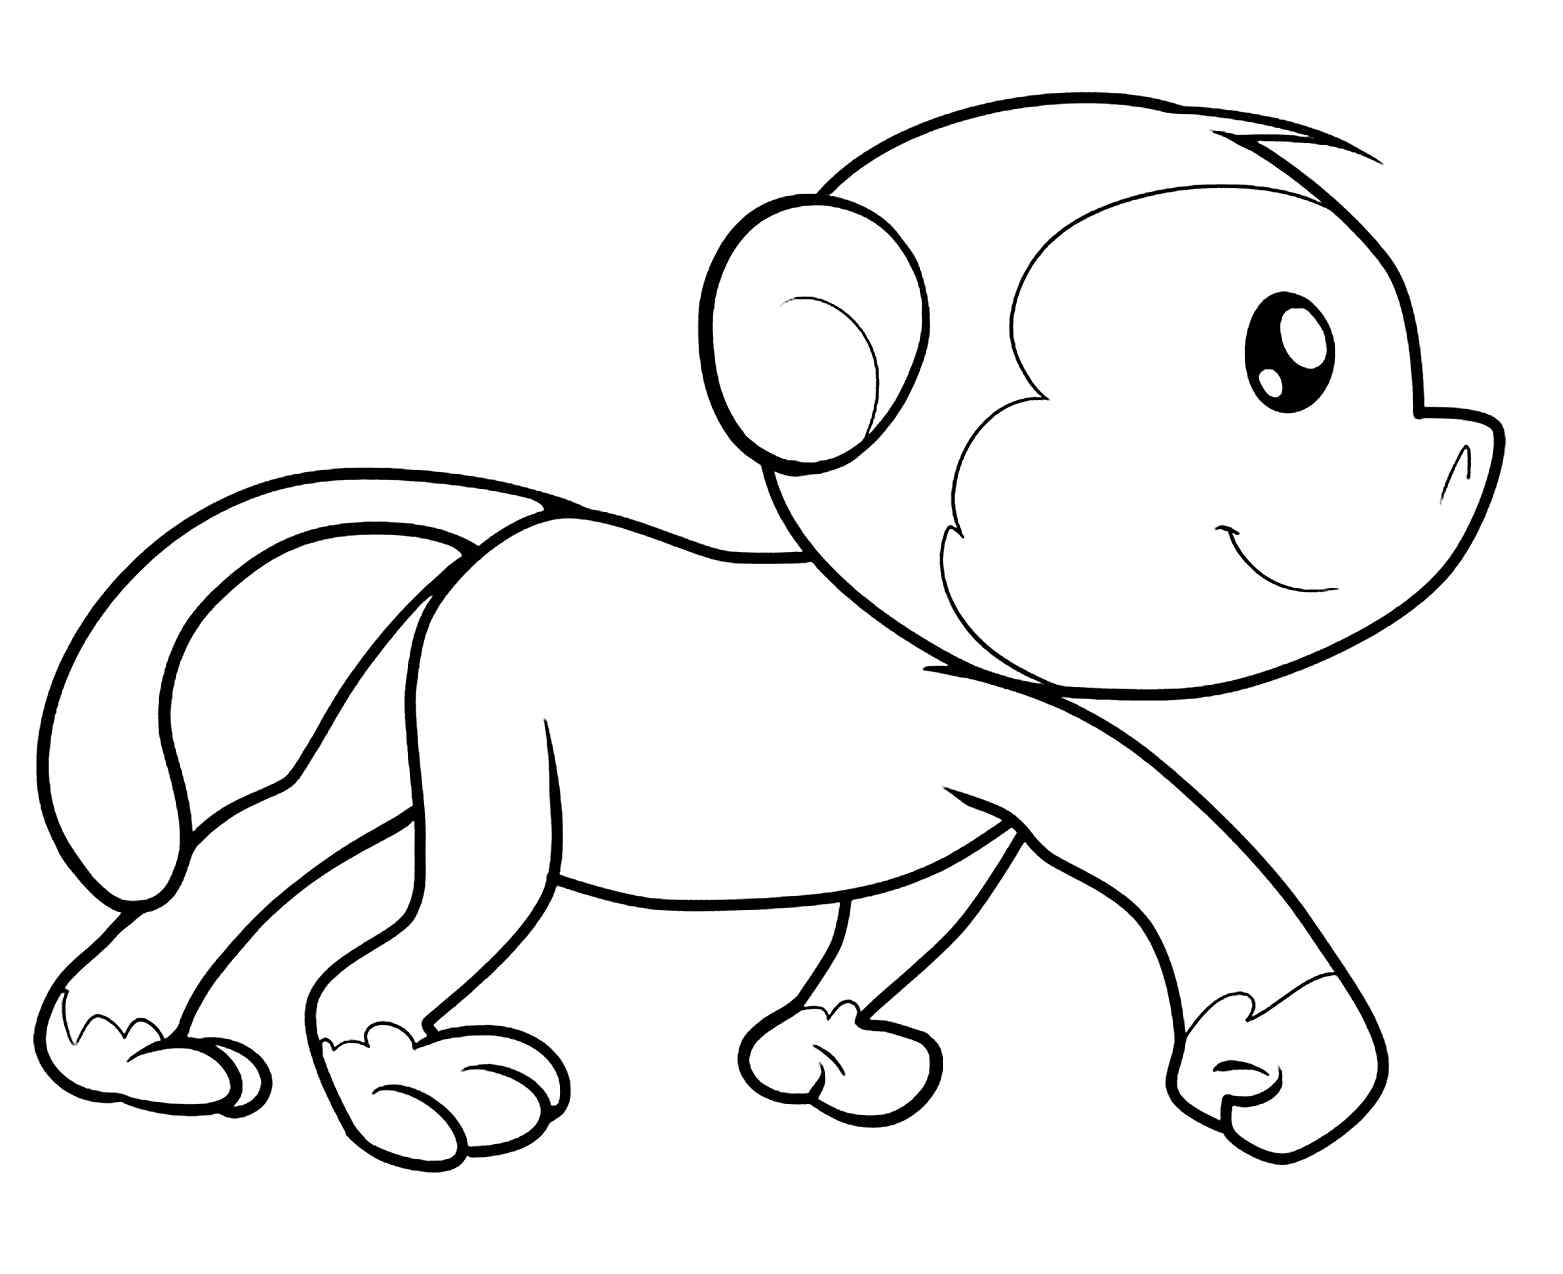 Simple monkey Coloring Page